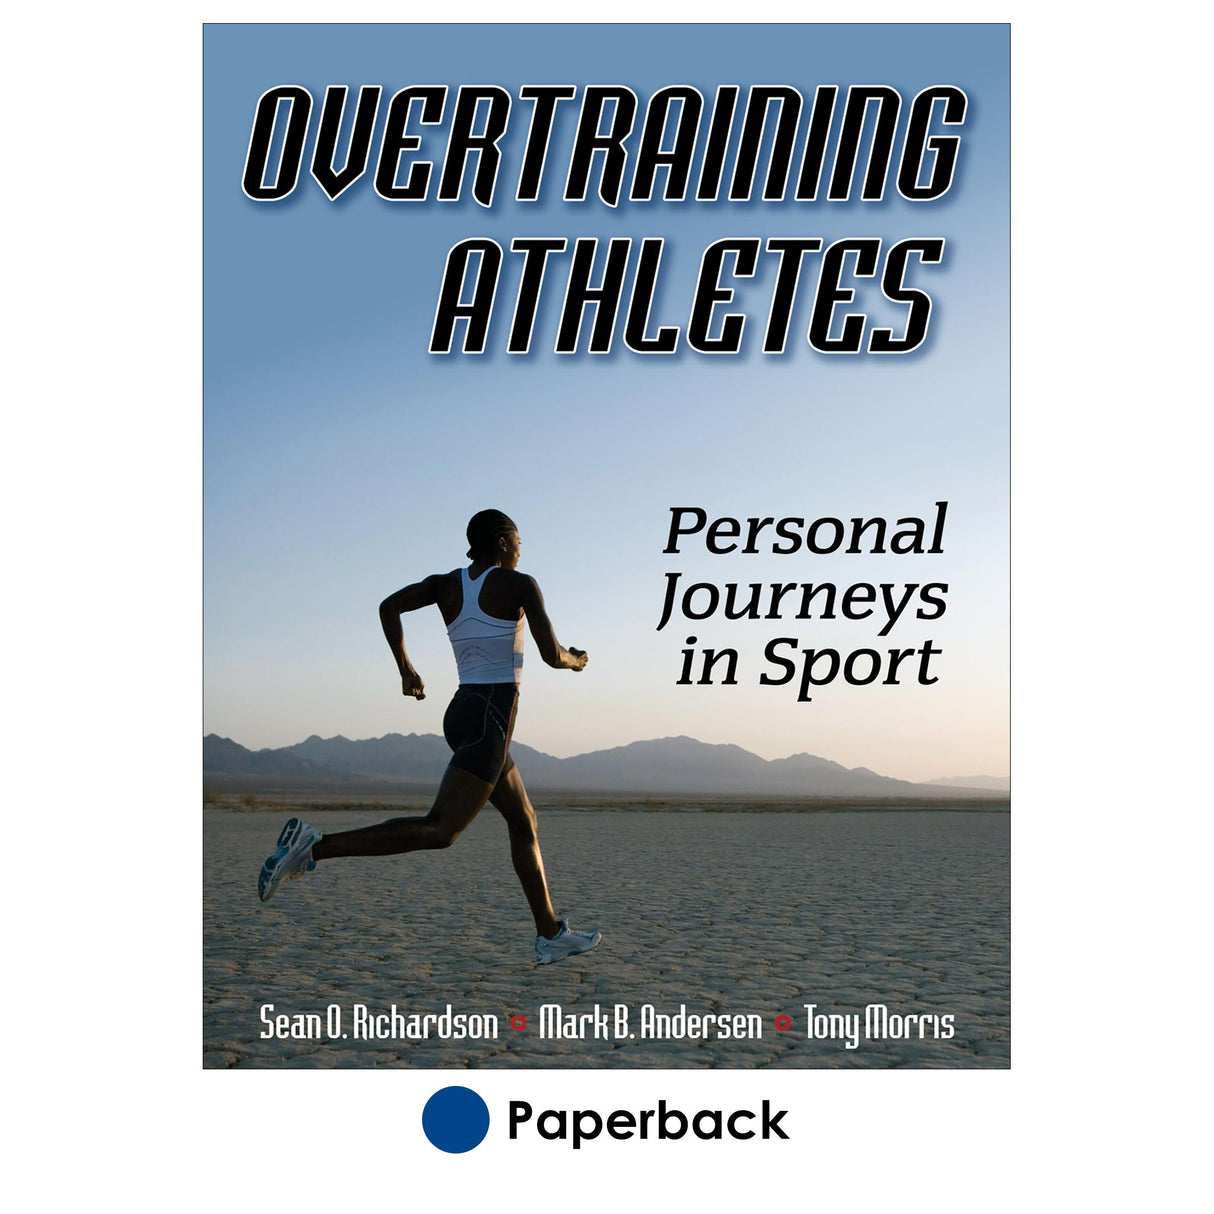 Overtraining Athletes: Personal Journeys in Sport